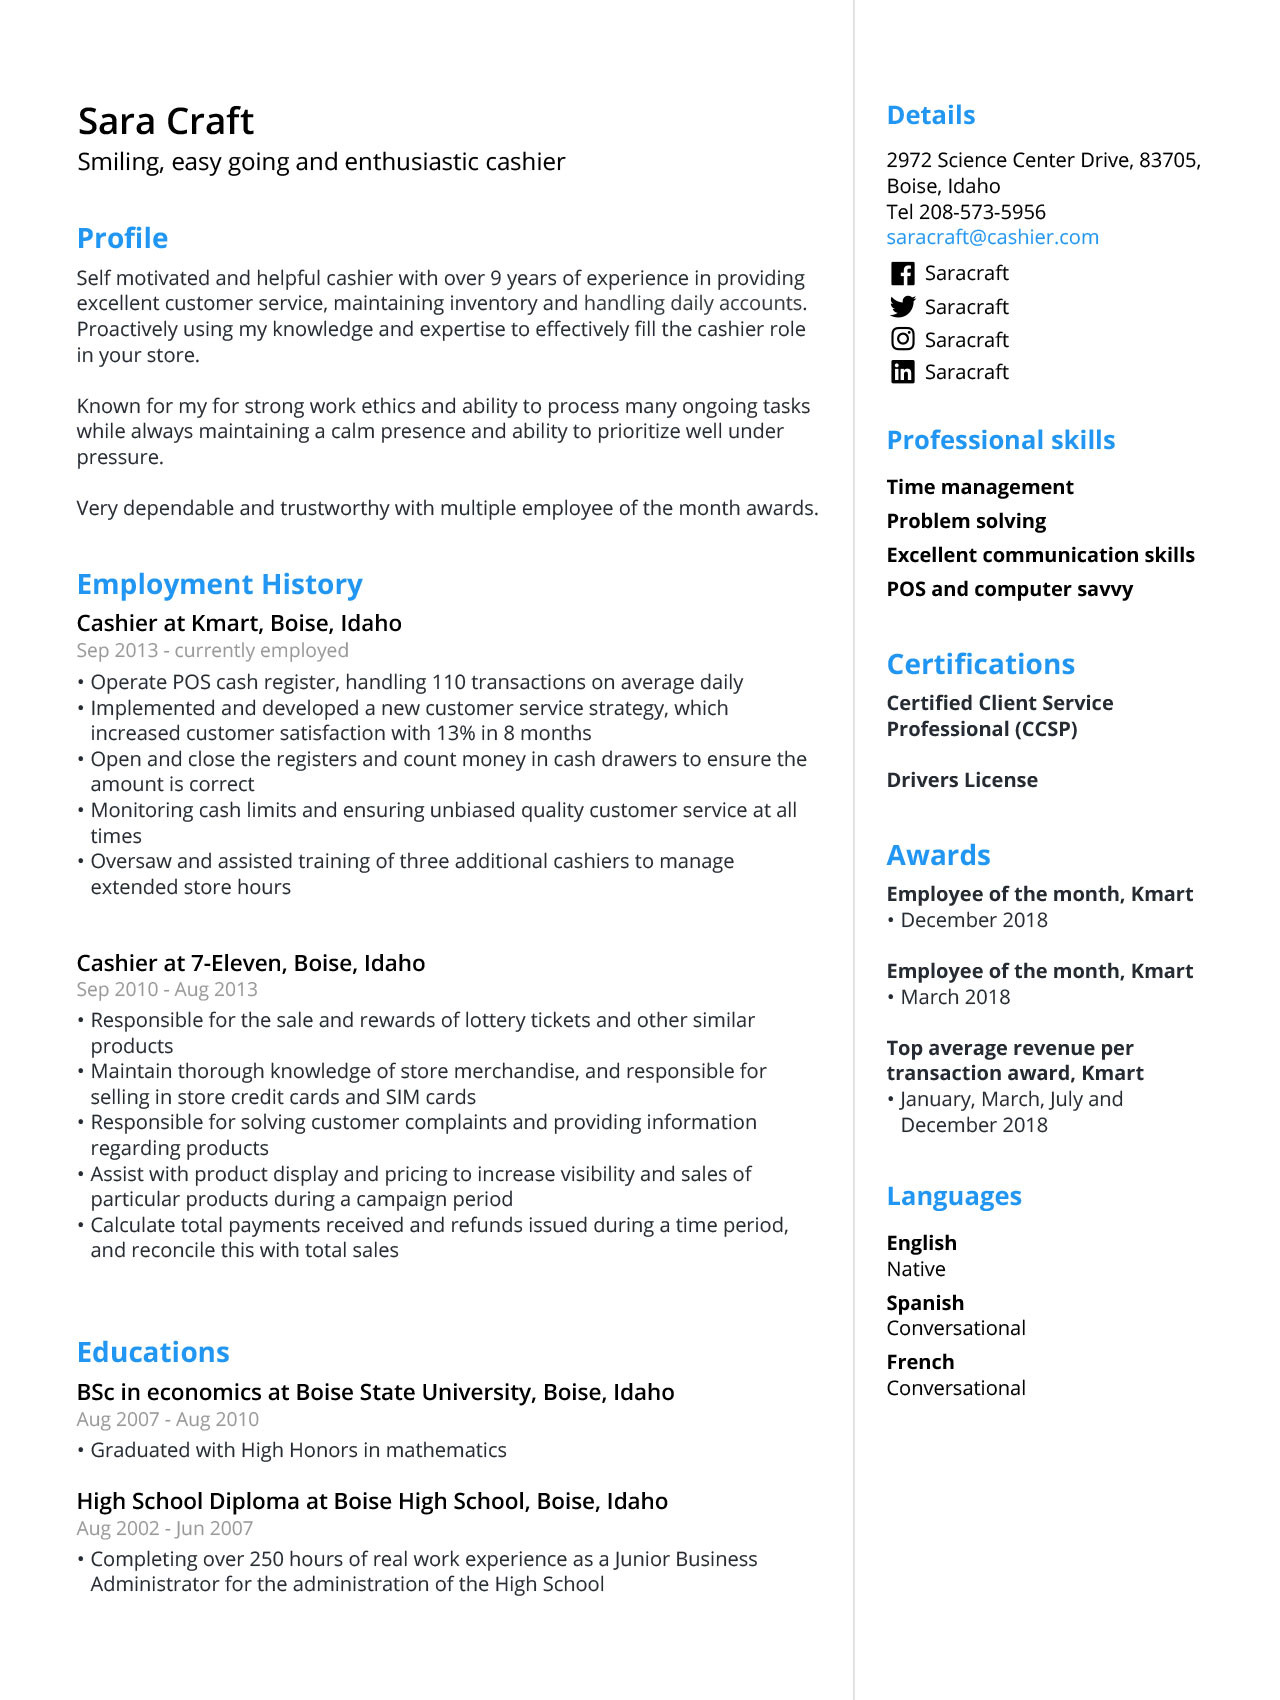 Sample Resume for Cashier Job with No Experience Cashier Resume Sample & Template [2021 Guide] – Jofibo